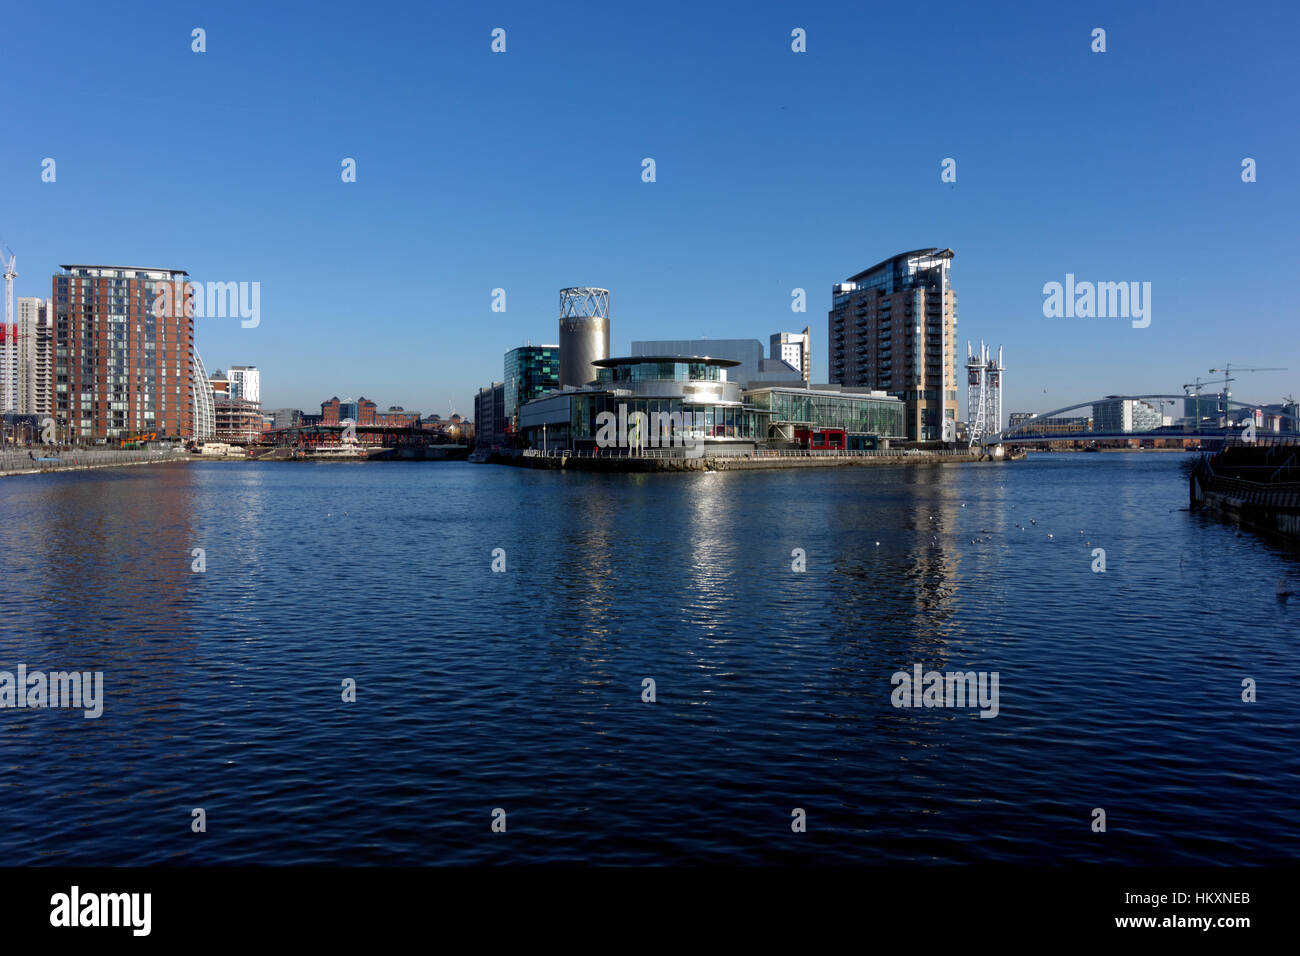 Manchester Ship Canal and Salford Quays, Salford, Manchester, UK. Stock Photo